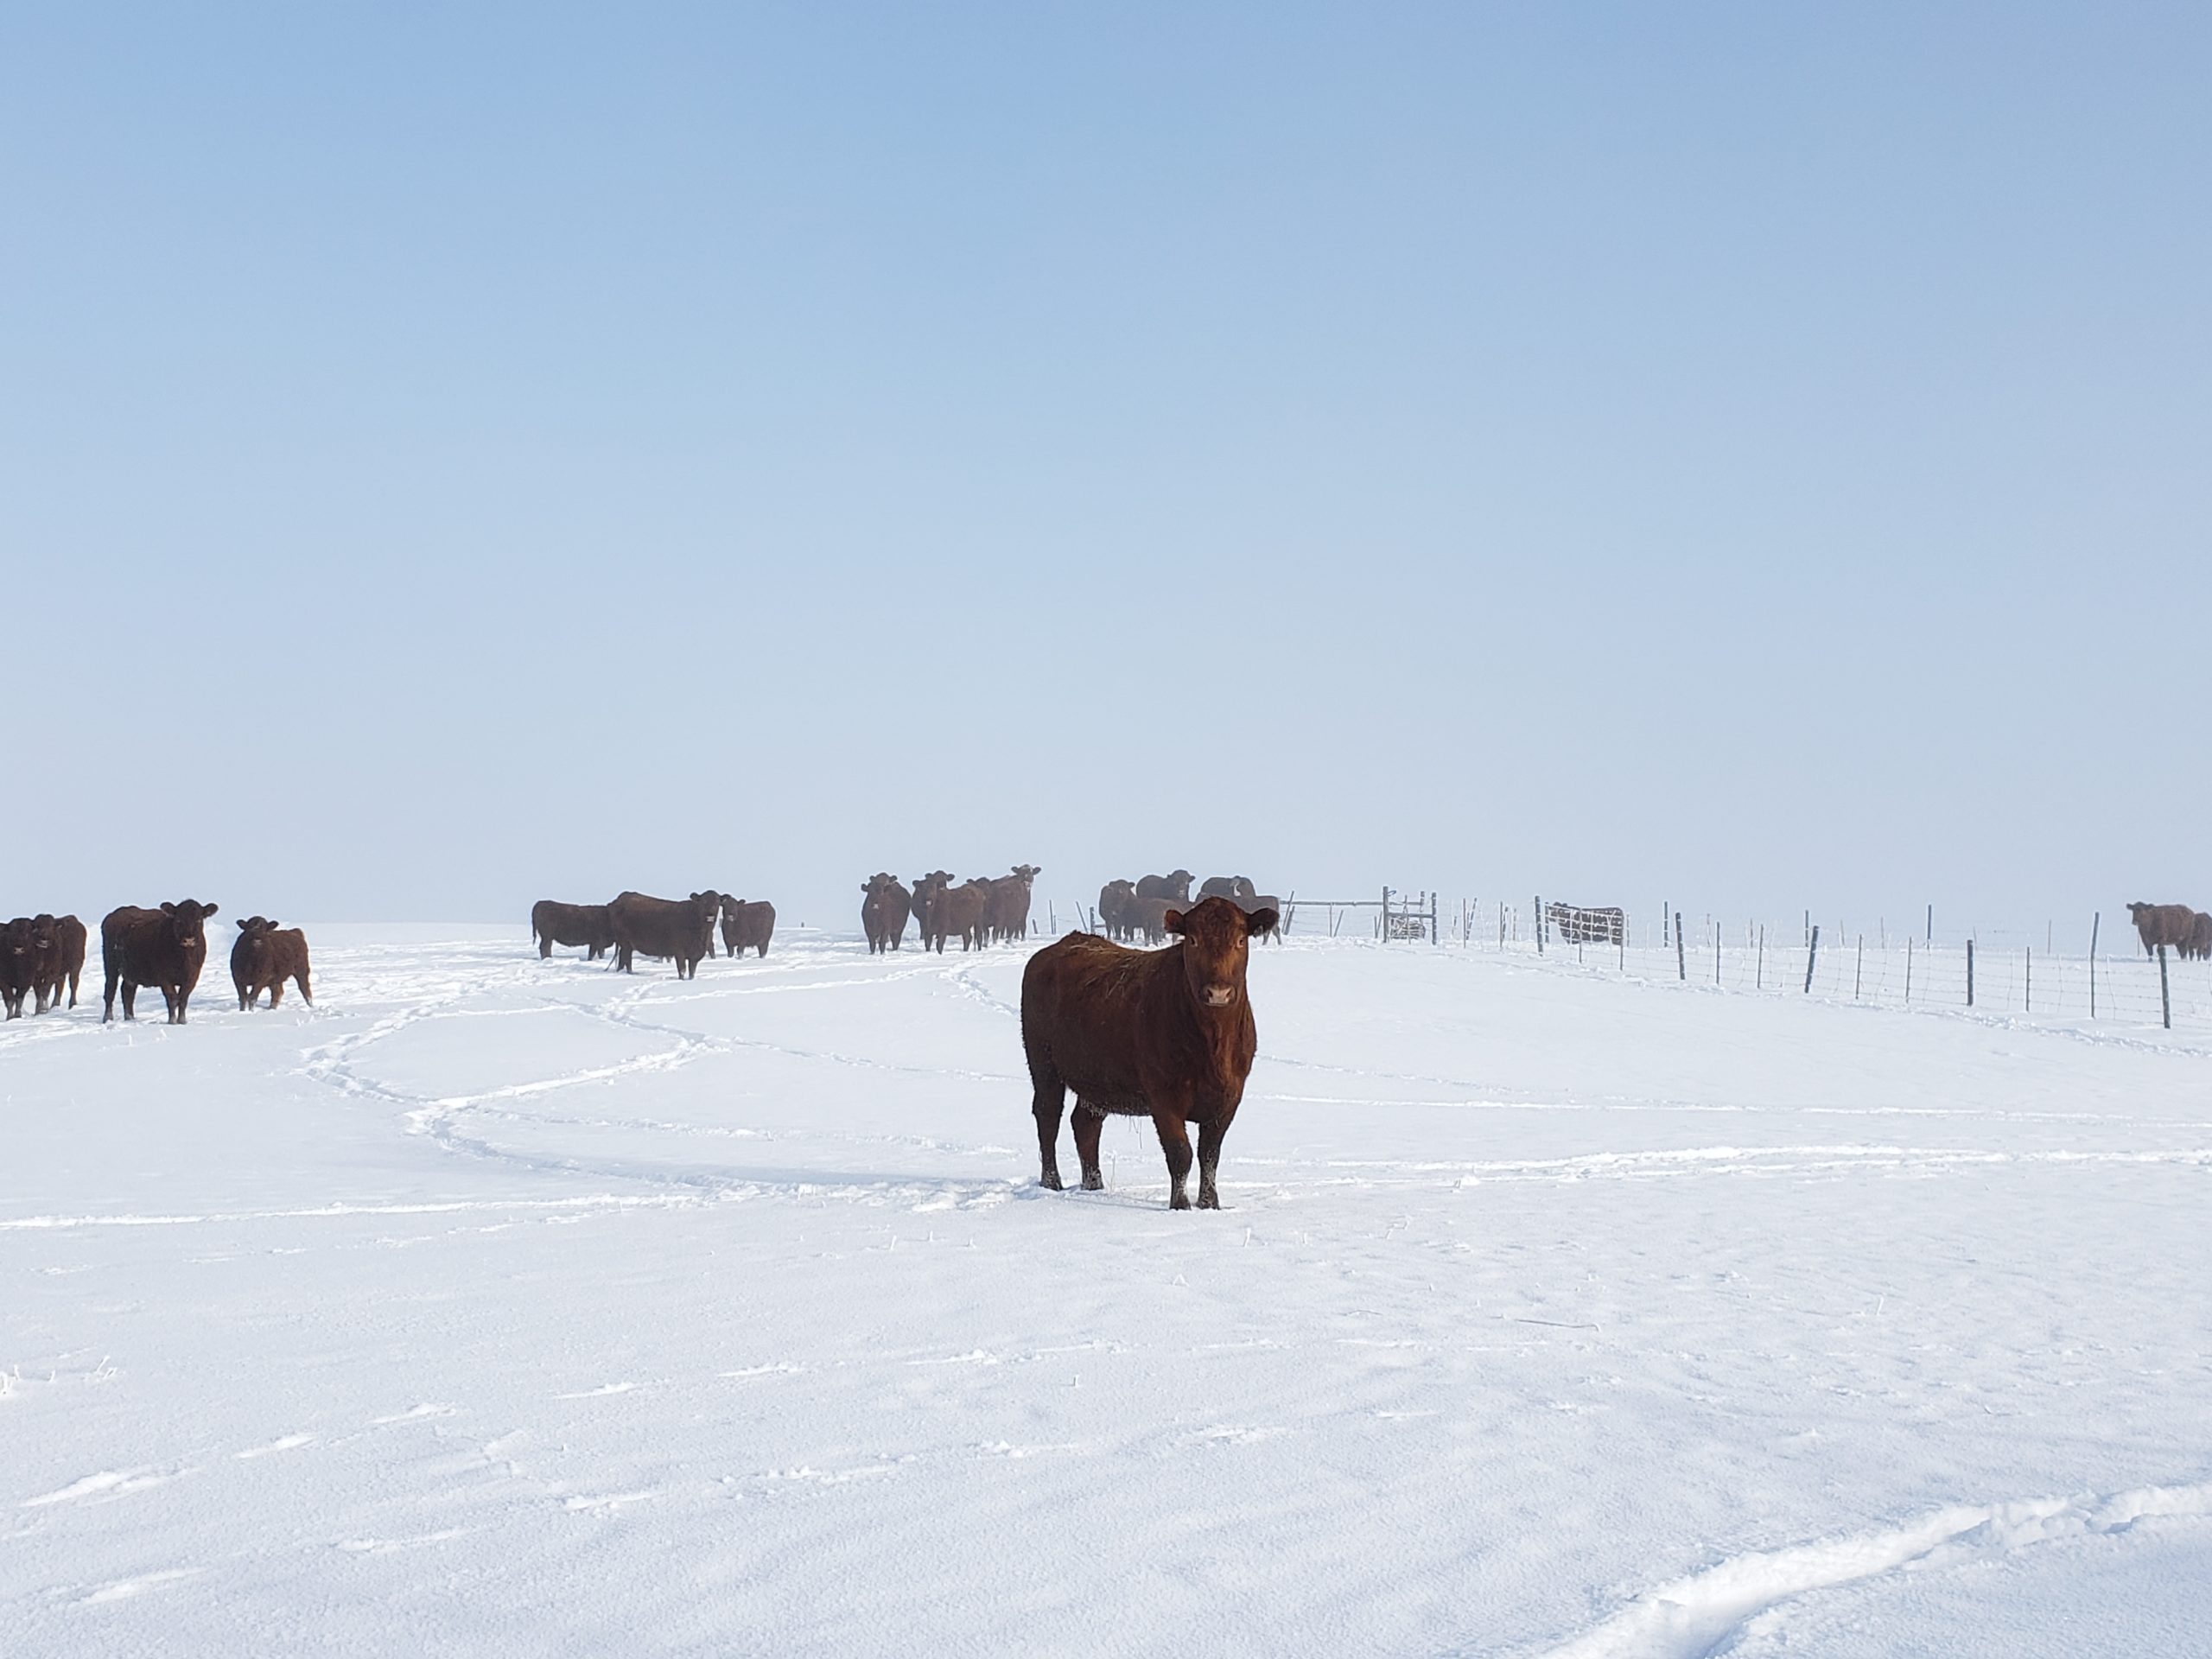 a herd of cows standing in a snow-covered field, with a single cow at the front